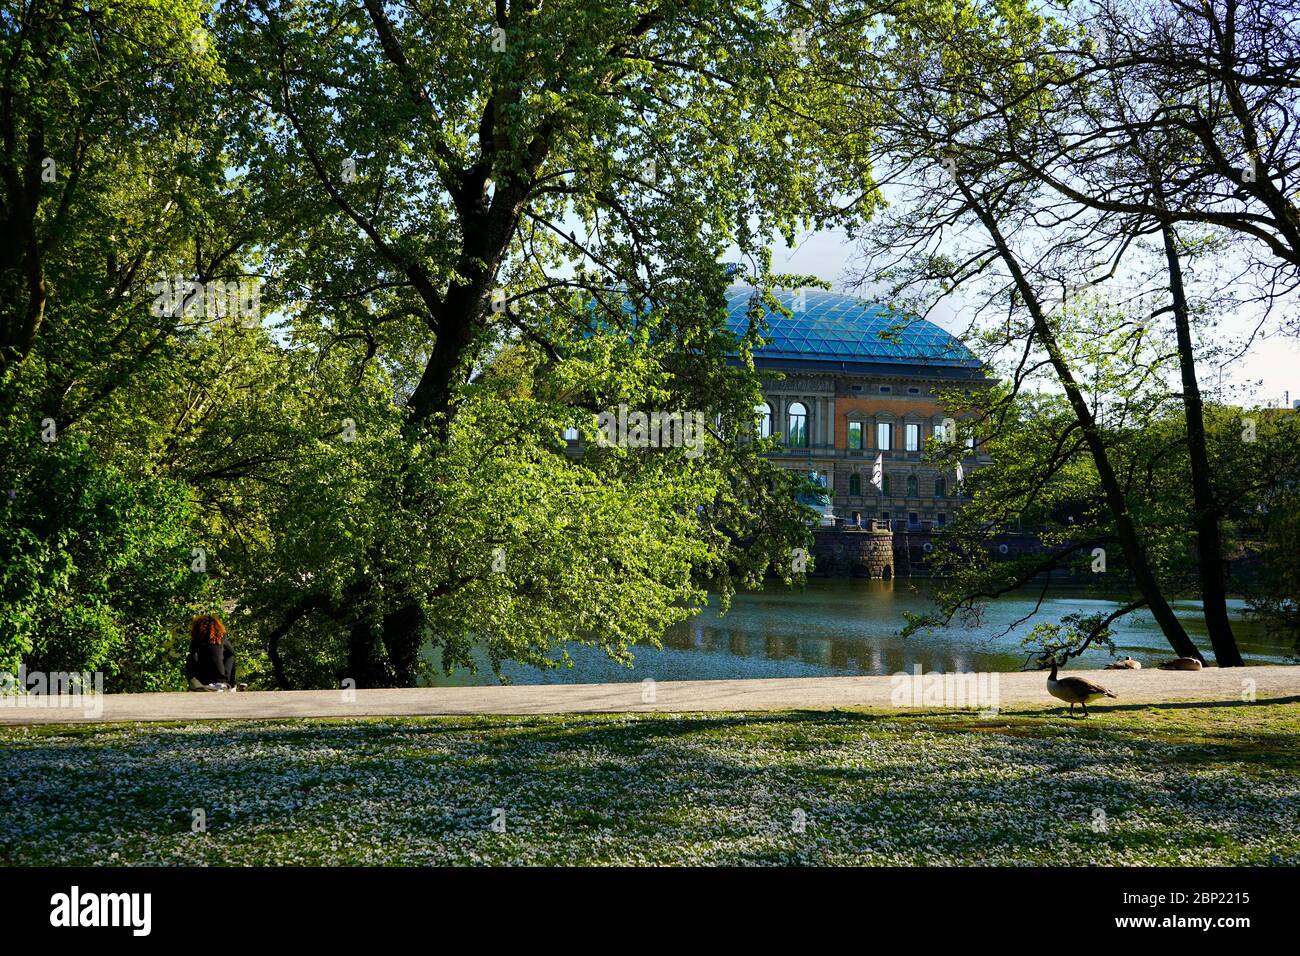 Romantic Spring scenery in the public park 'Ständehauspark' with an ancient building ('Ständehaus') in the background that was built from 1876 - 1880. Stock Photo